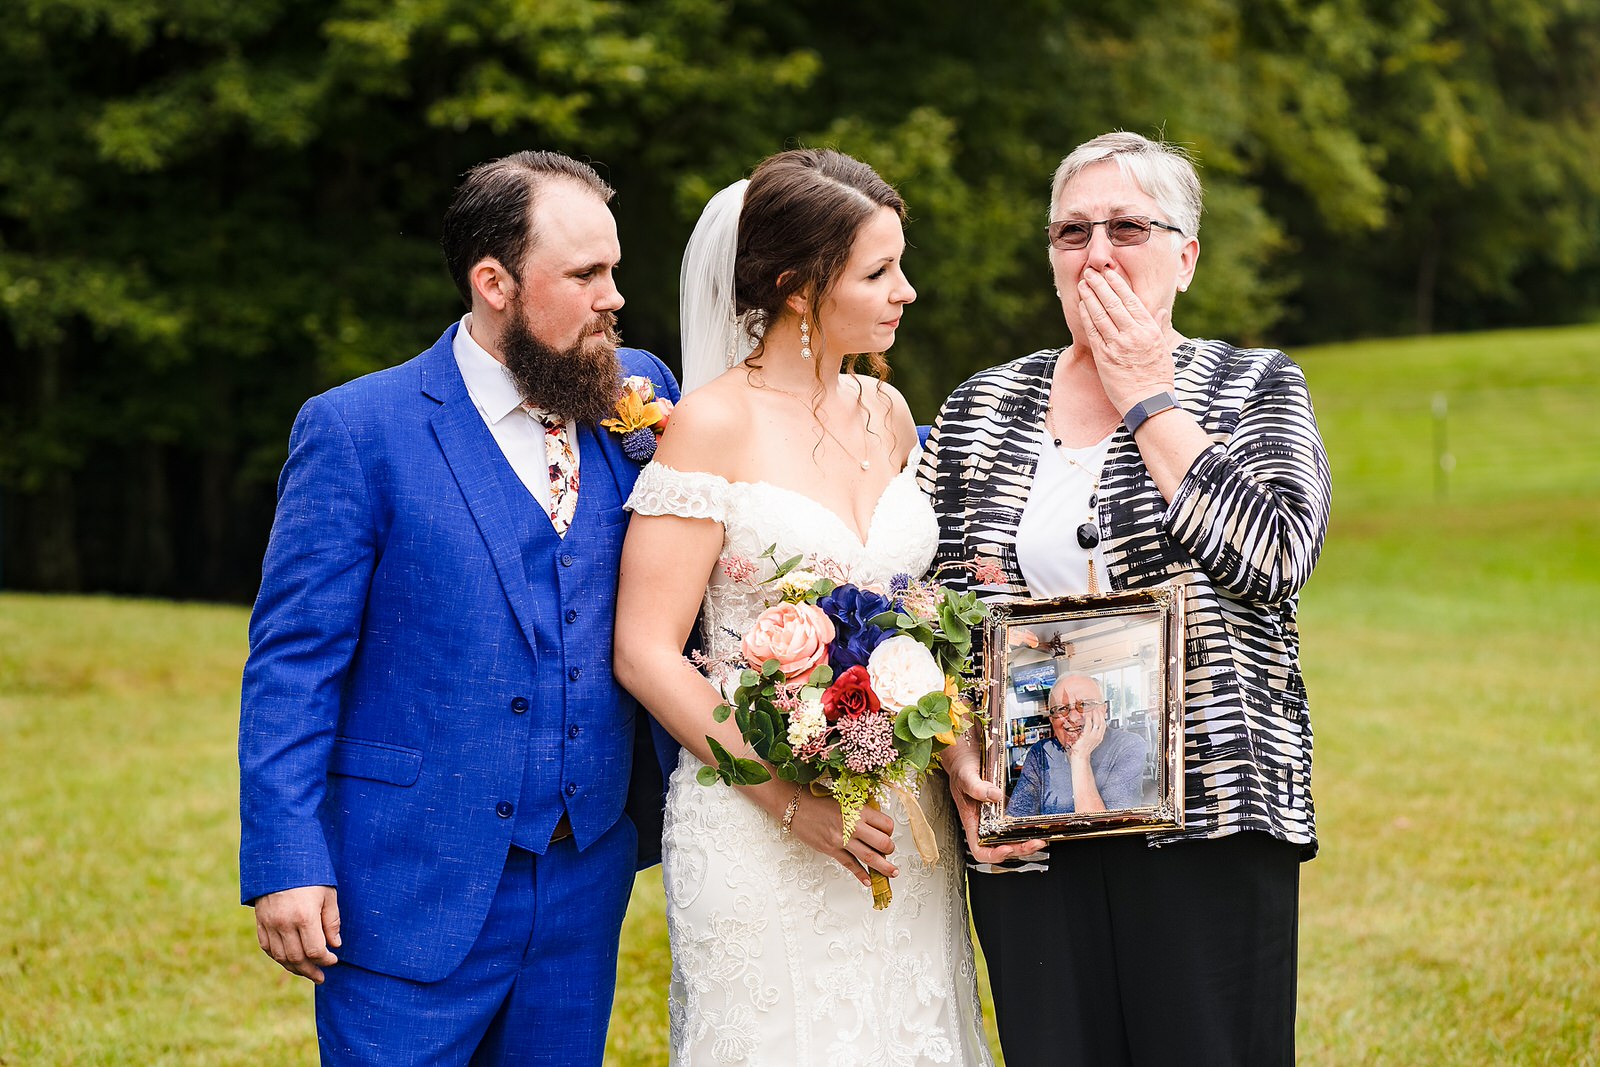 Bride and groom pose with bride's grandmother who reacts emotionally to holding a photograph of her recently deceased husband